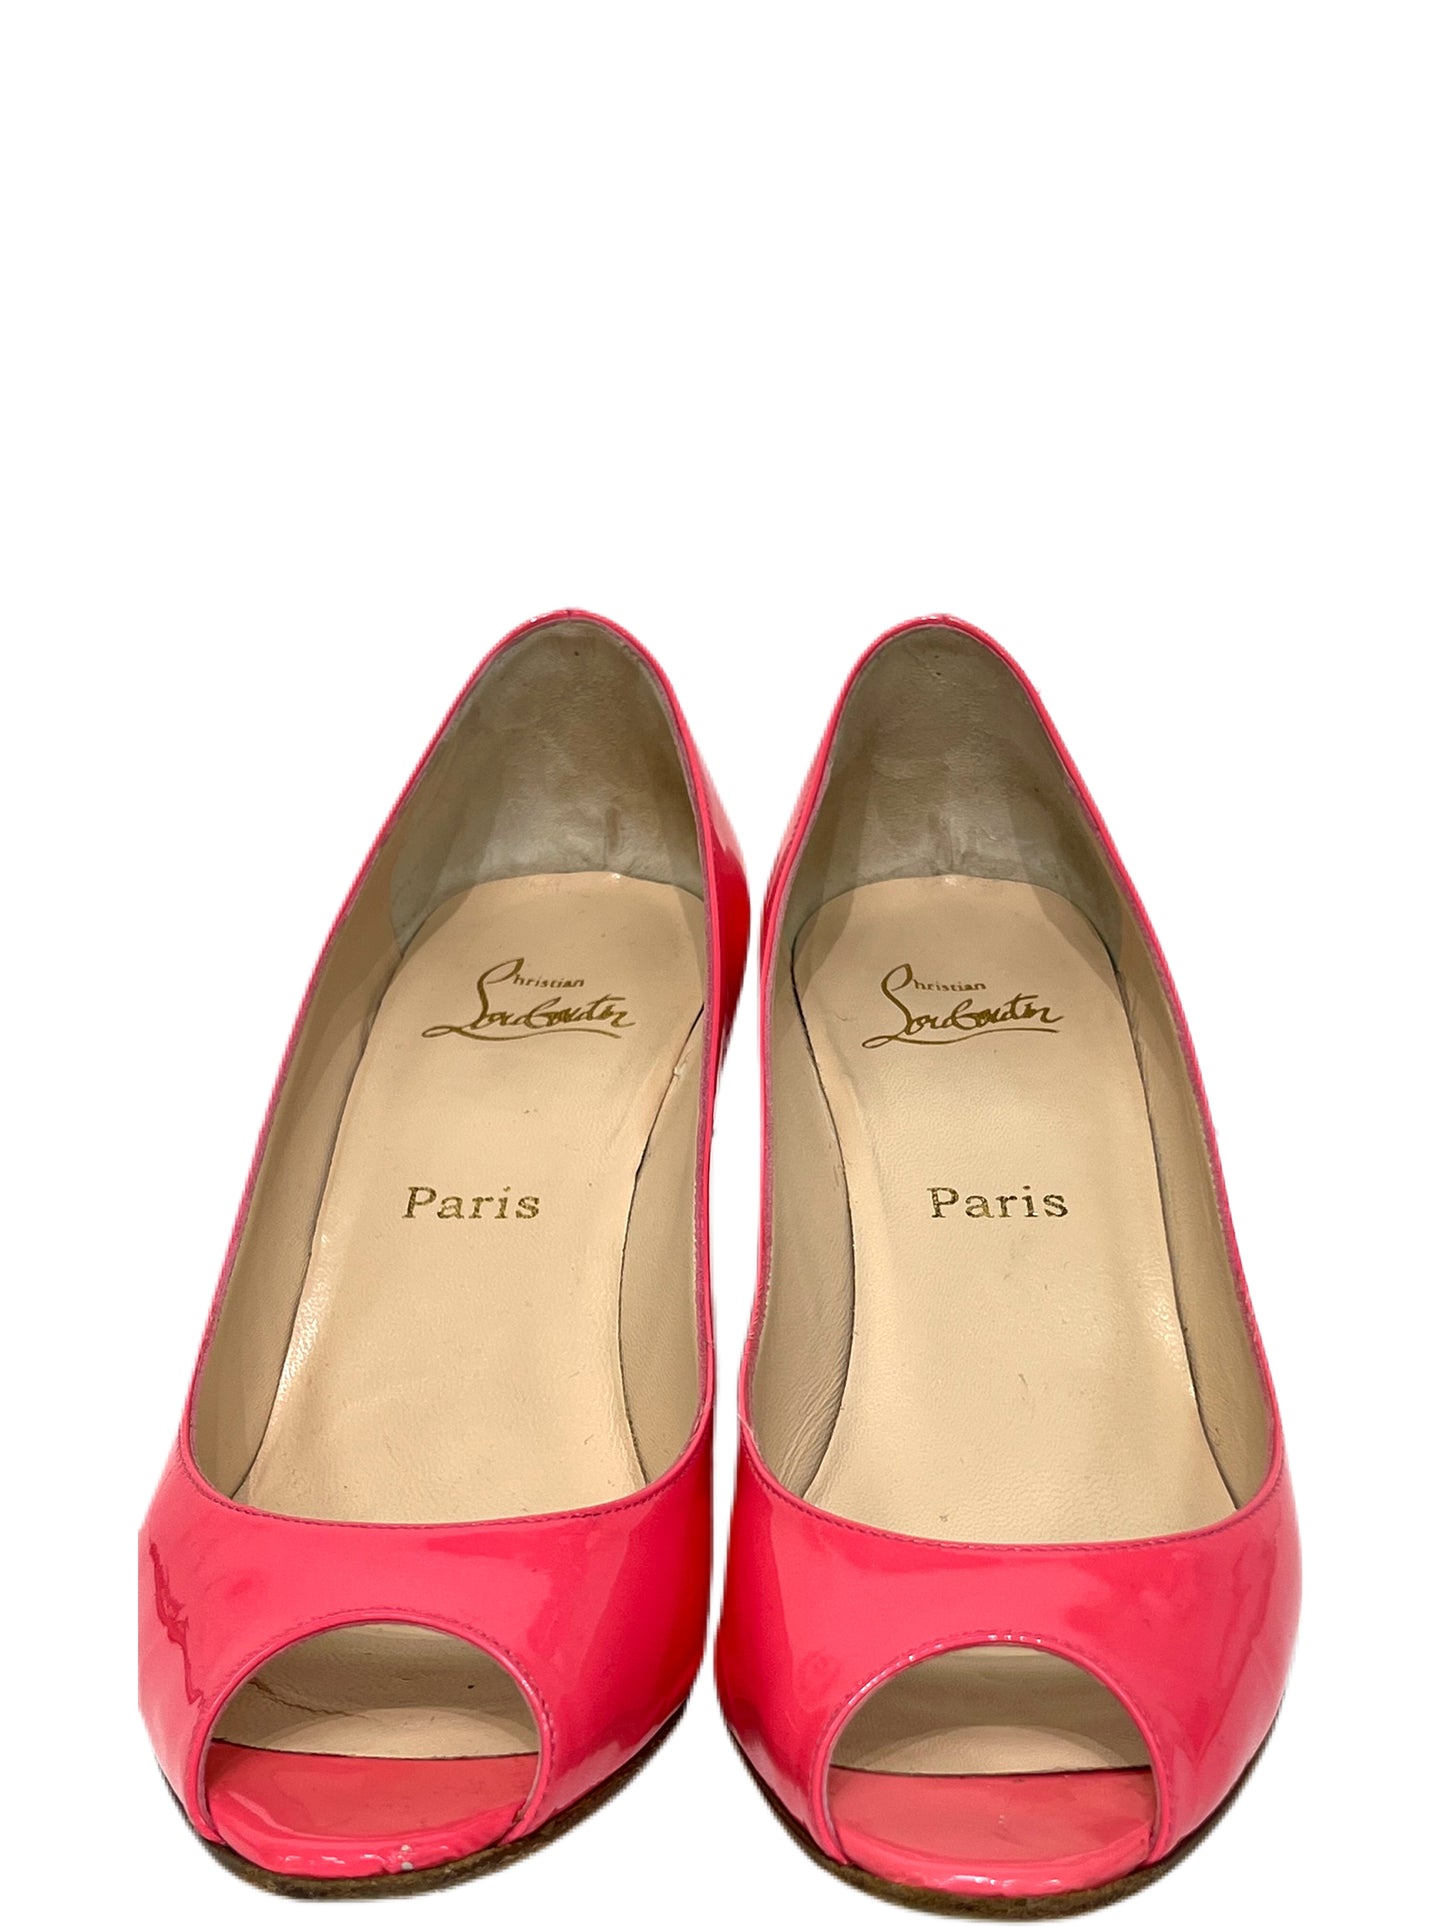 CHRISTIAN LOUBOUTIN Patent Leather Wedges Hot Pink Size 39